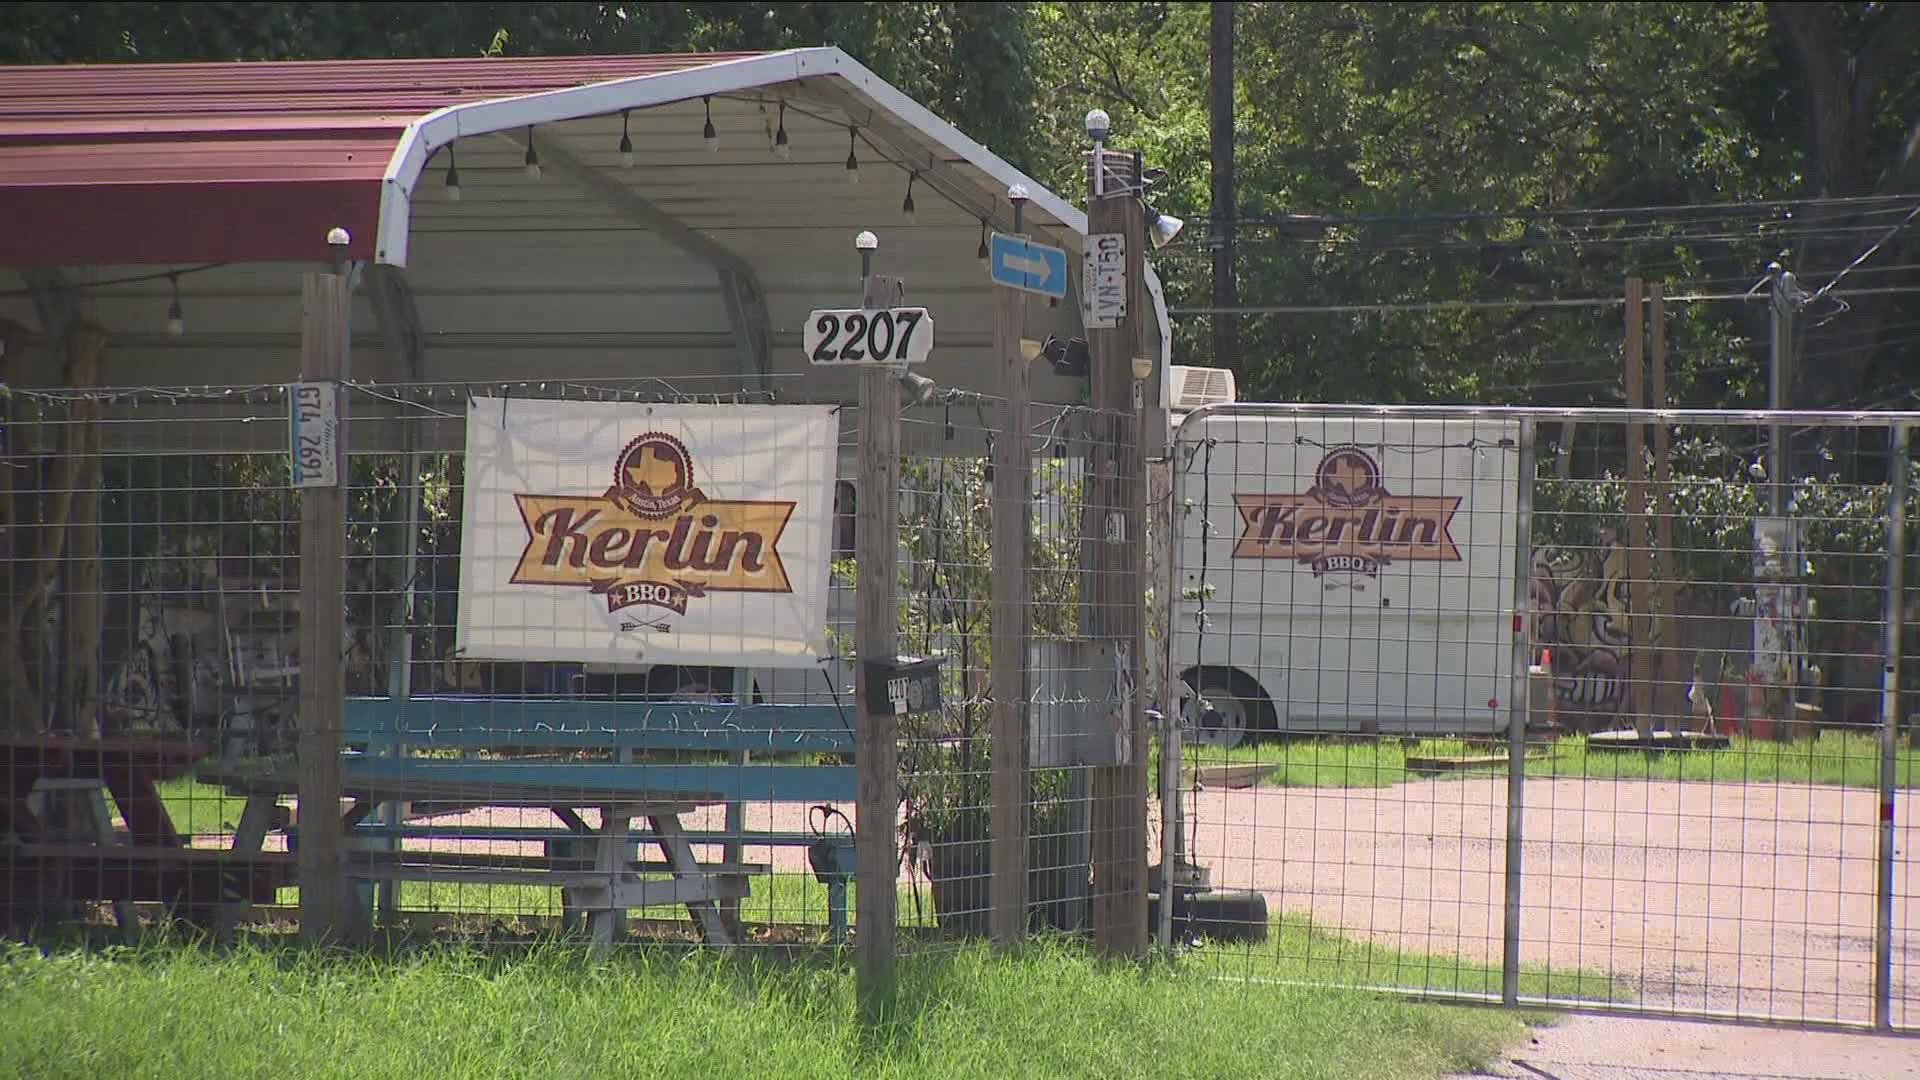 Kerlin BBQ, a popular spot on the east side, announced it is closing its doors this week. KVUE spoke with the owners about their plan.